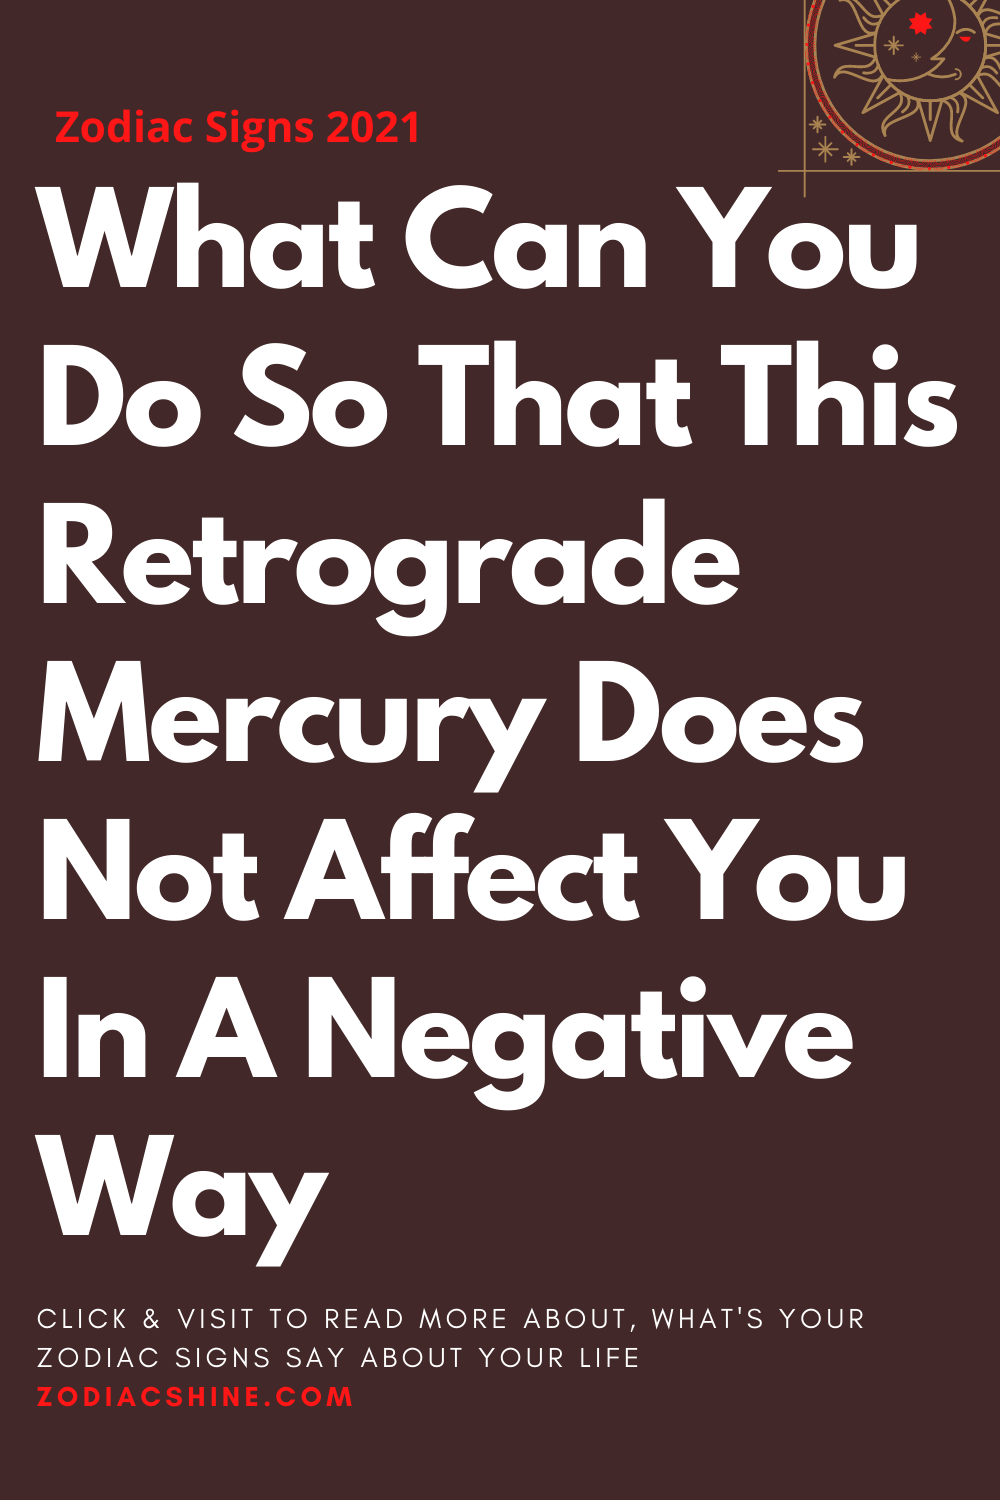 What Can You Do So That This Retrograde Mercury Does Not Affect You In A Negative Way